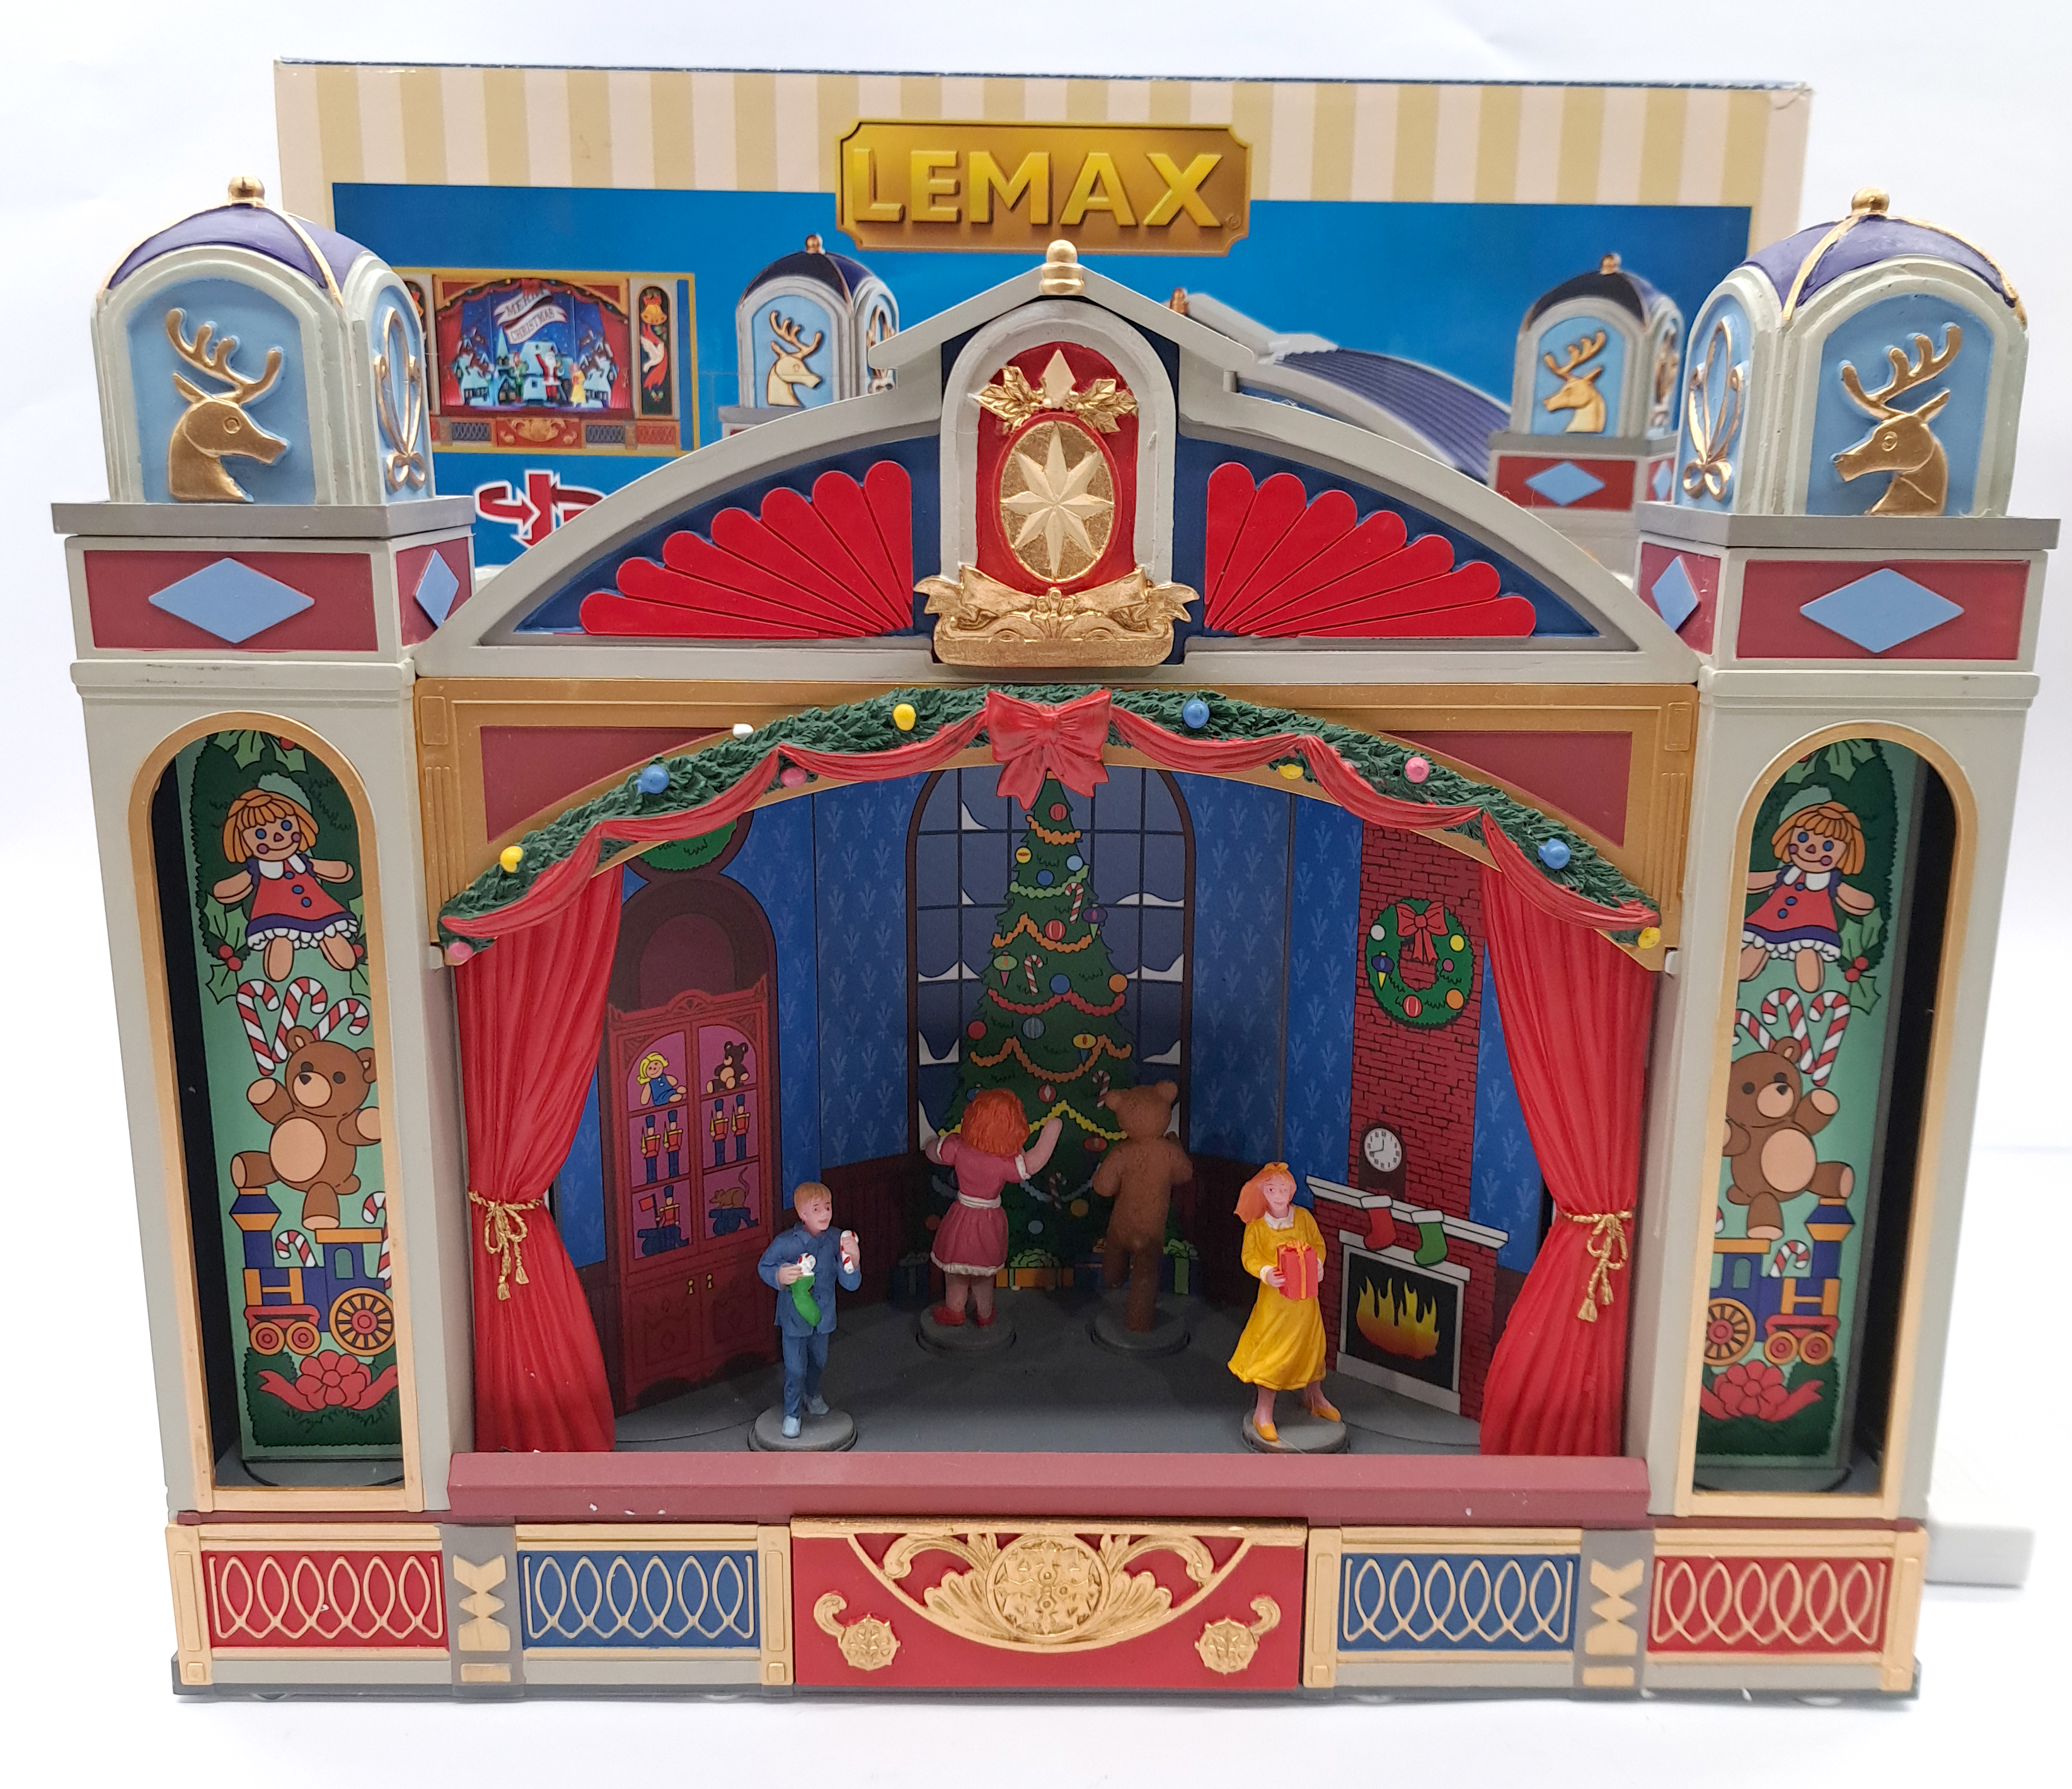 Lemax Christmas Village pair of porcelain lighted buildings / items - Image 2 of 3